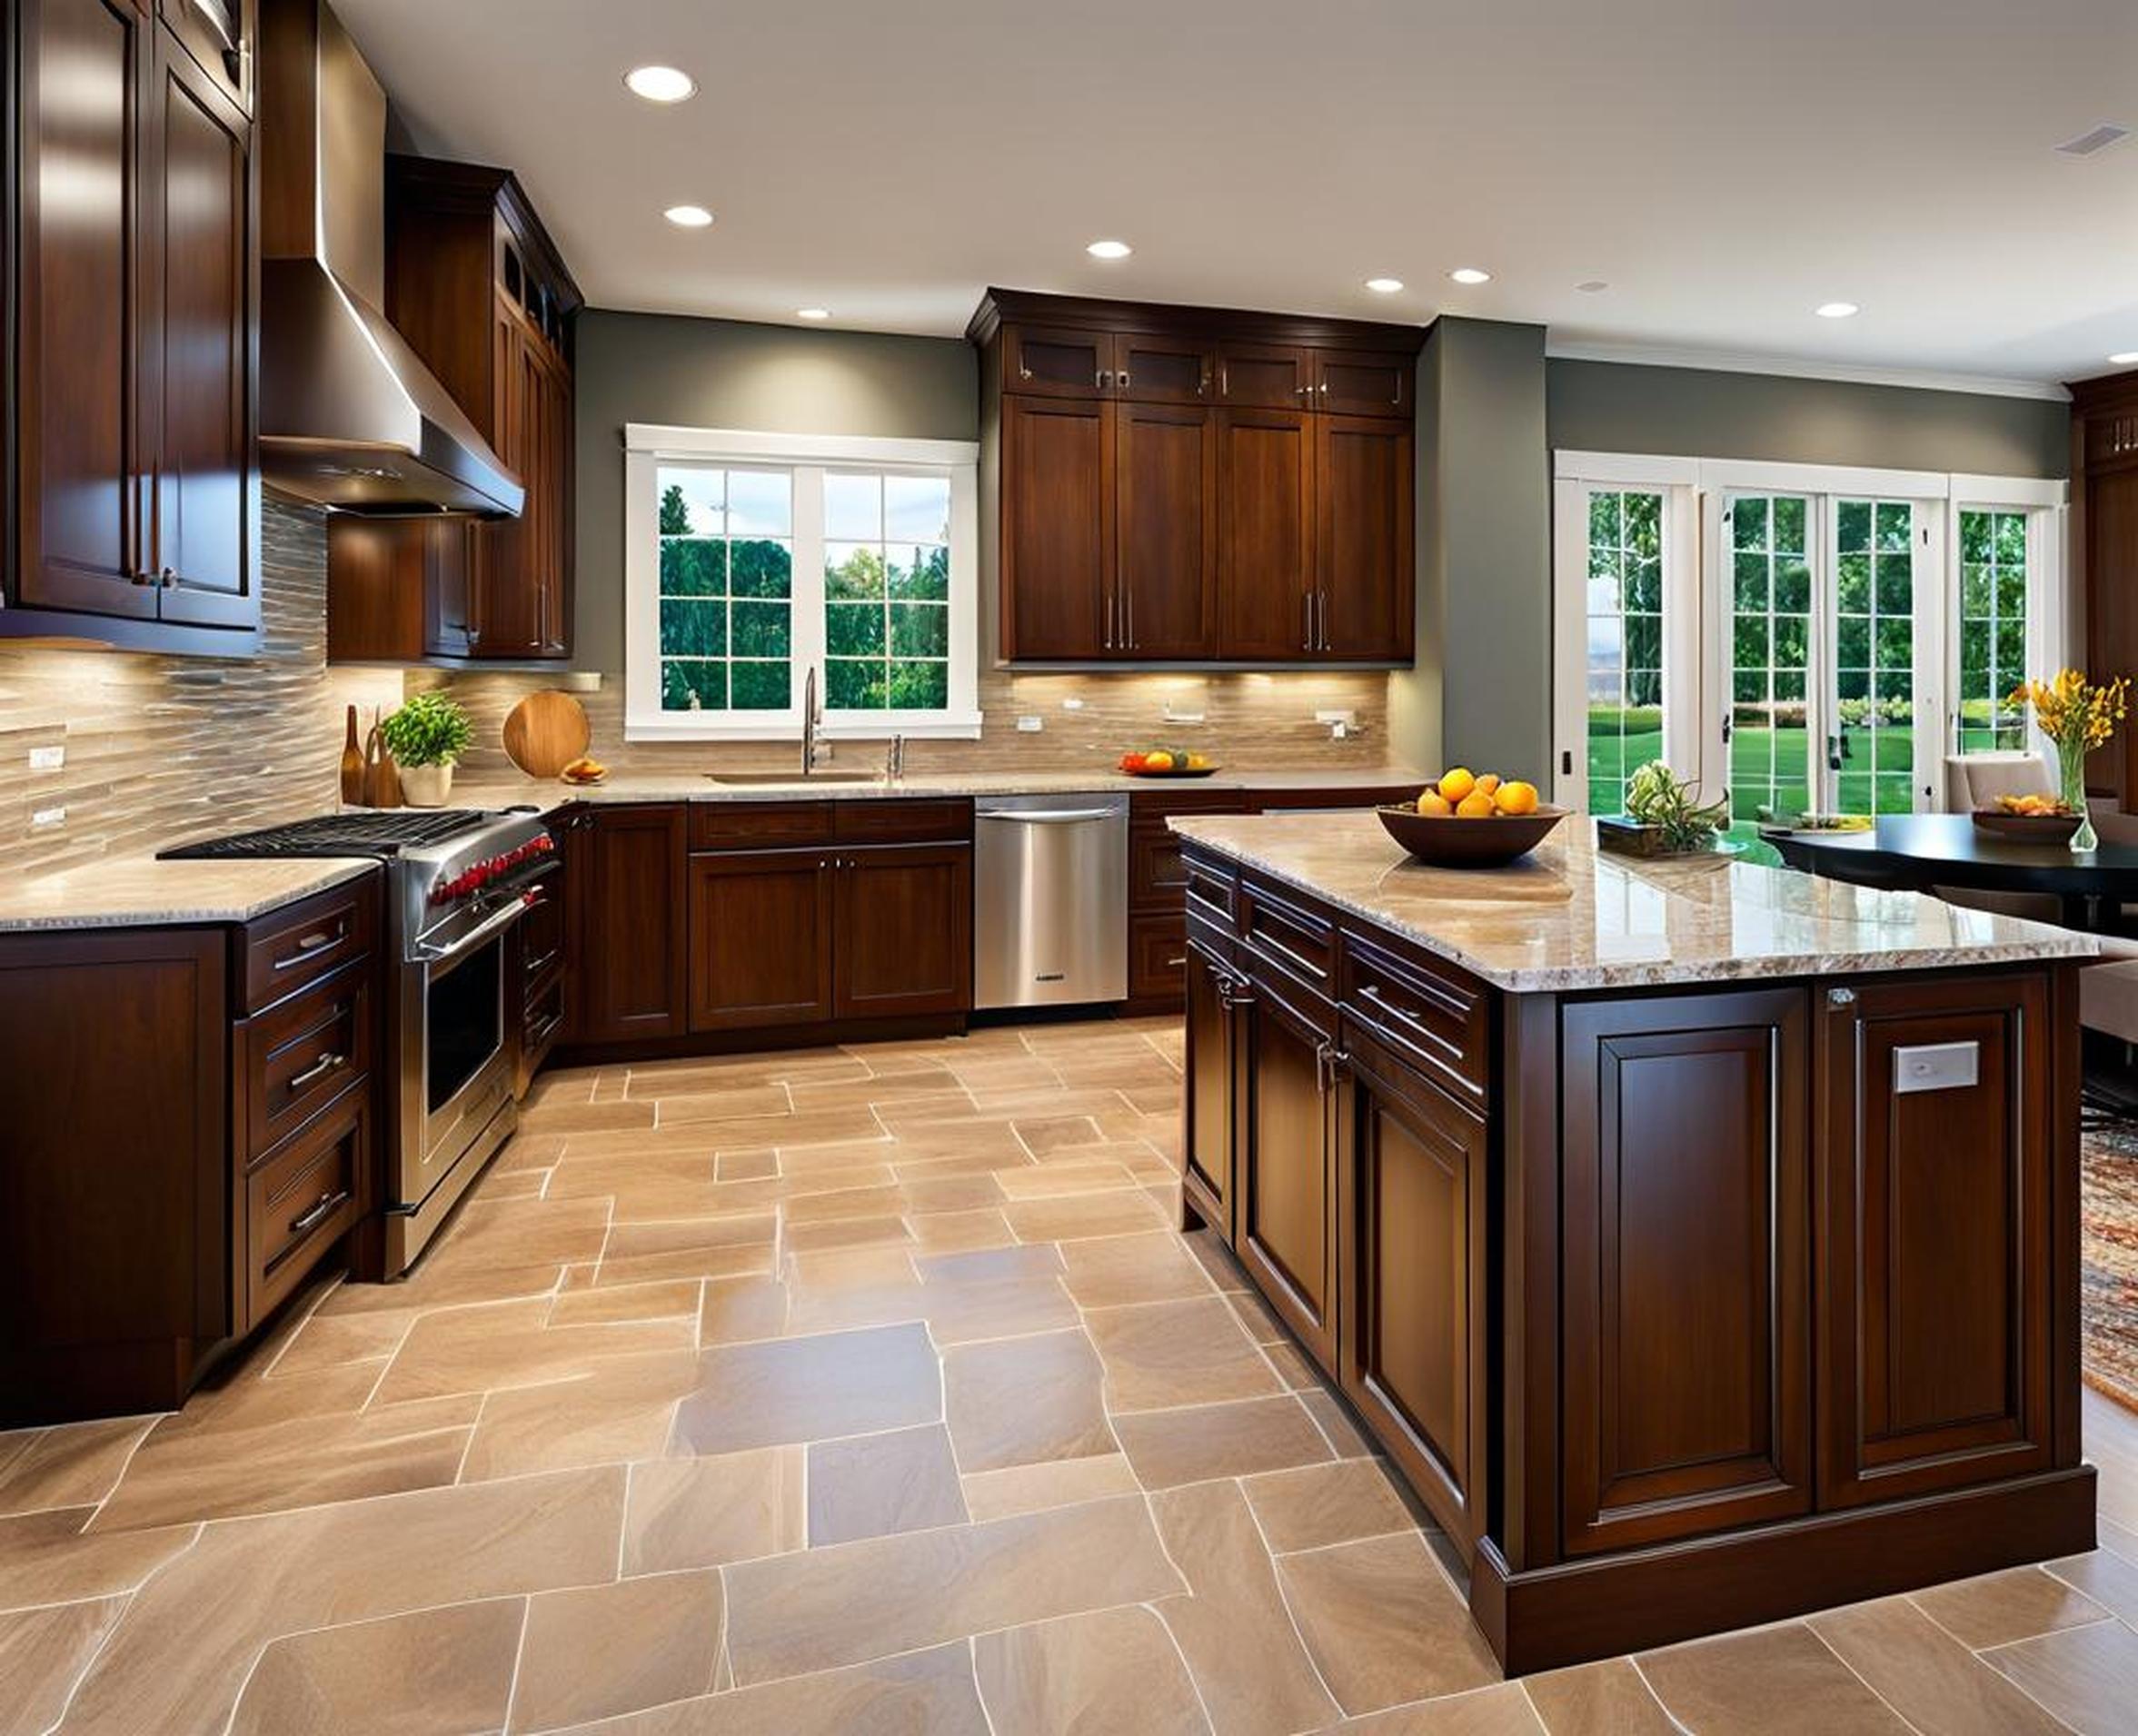 kitchen cabinets countertops and flooring combinations